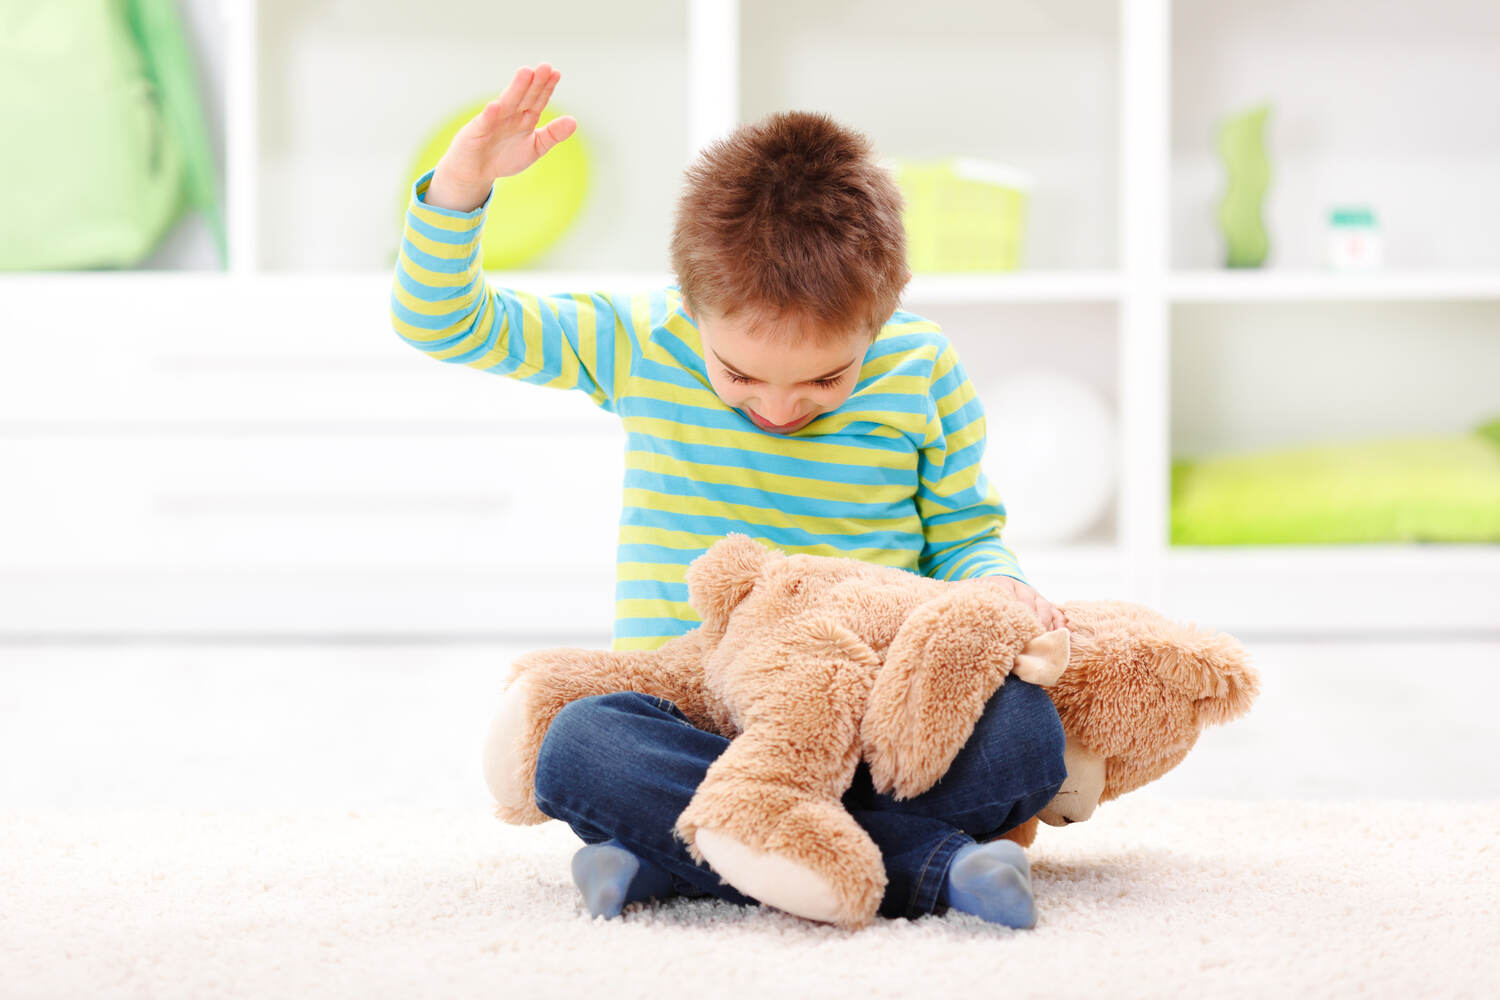 When toddler's anger spills into hurting others you should seek help